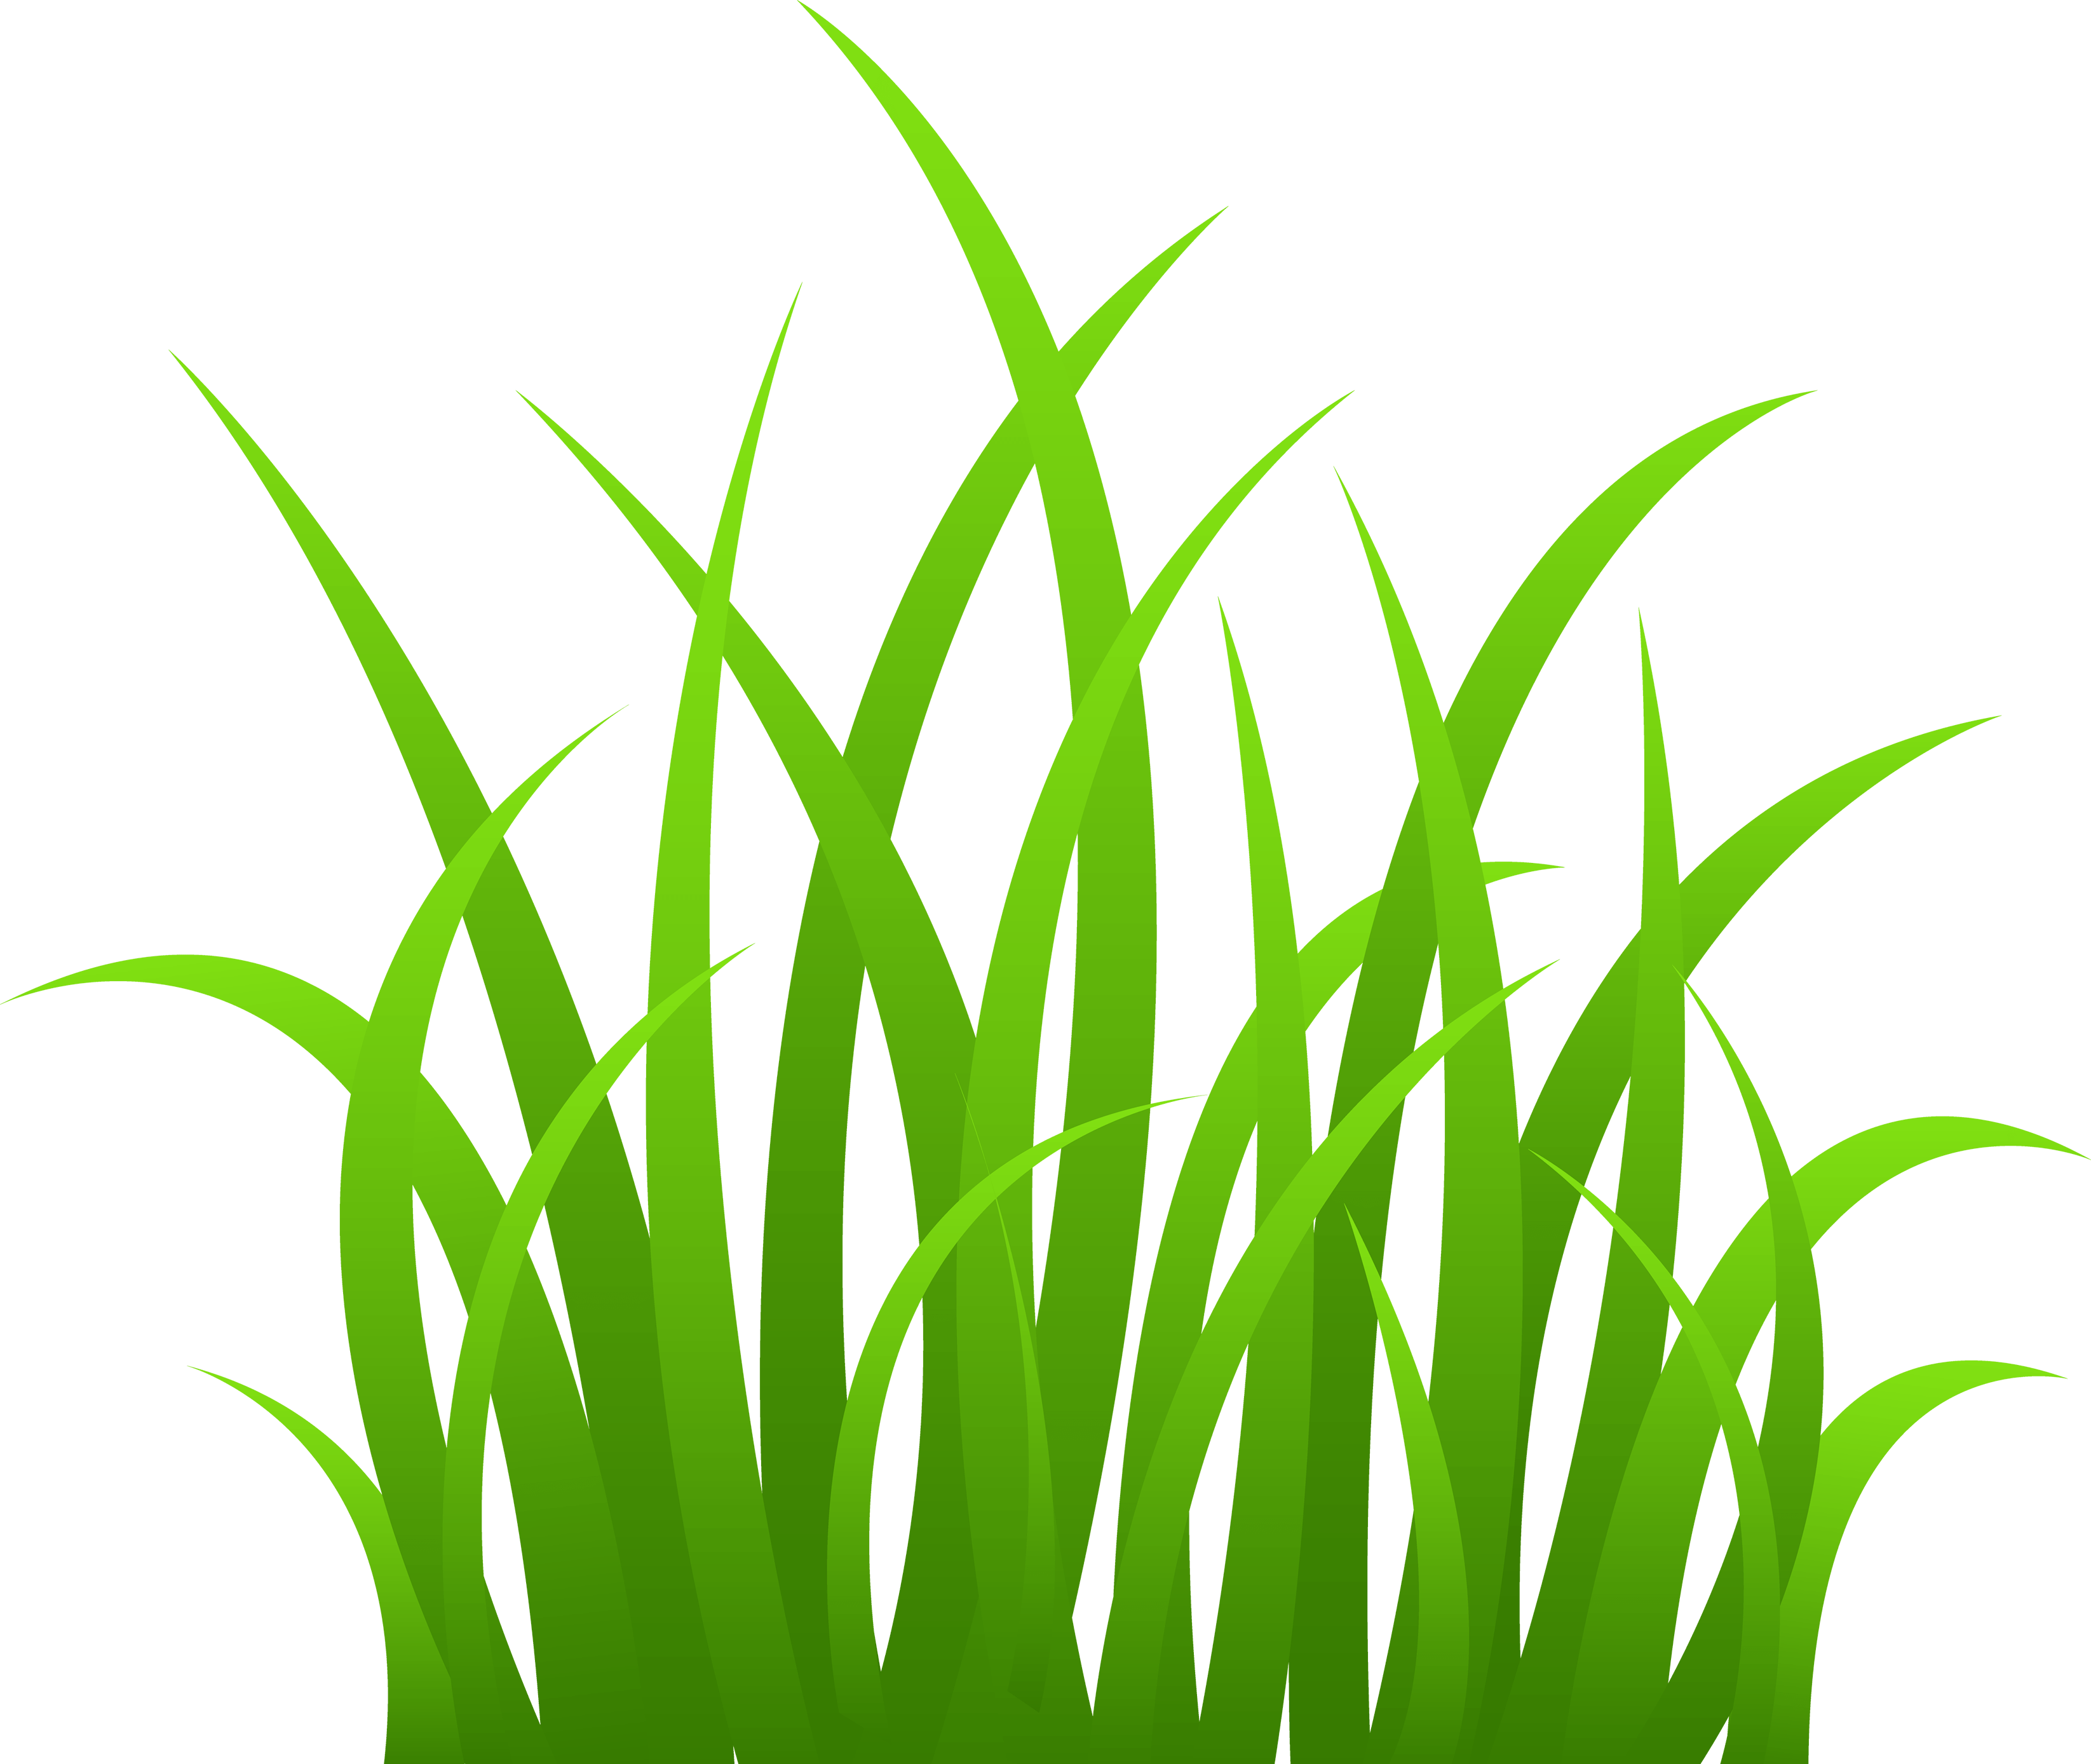 Swamp turf pencil and. Daisy clipart high grass